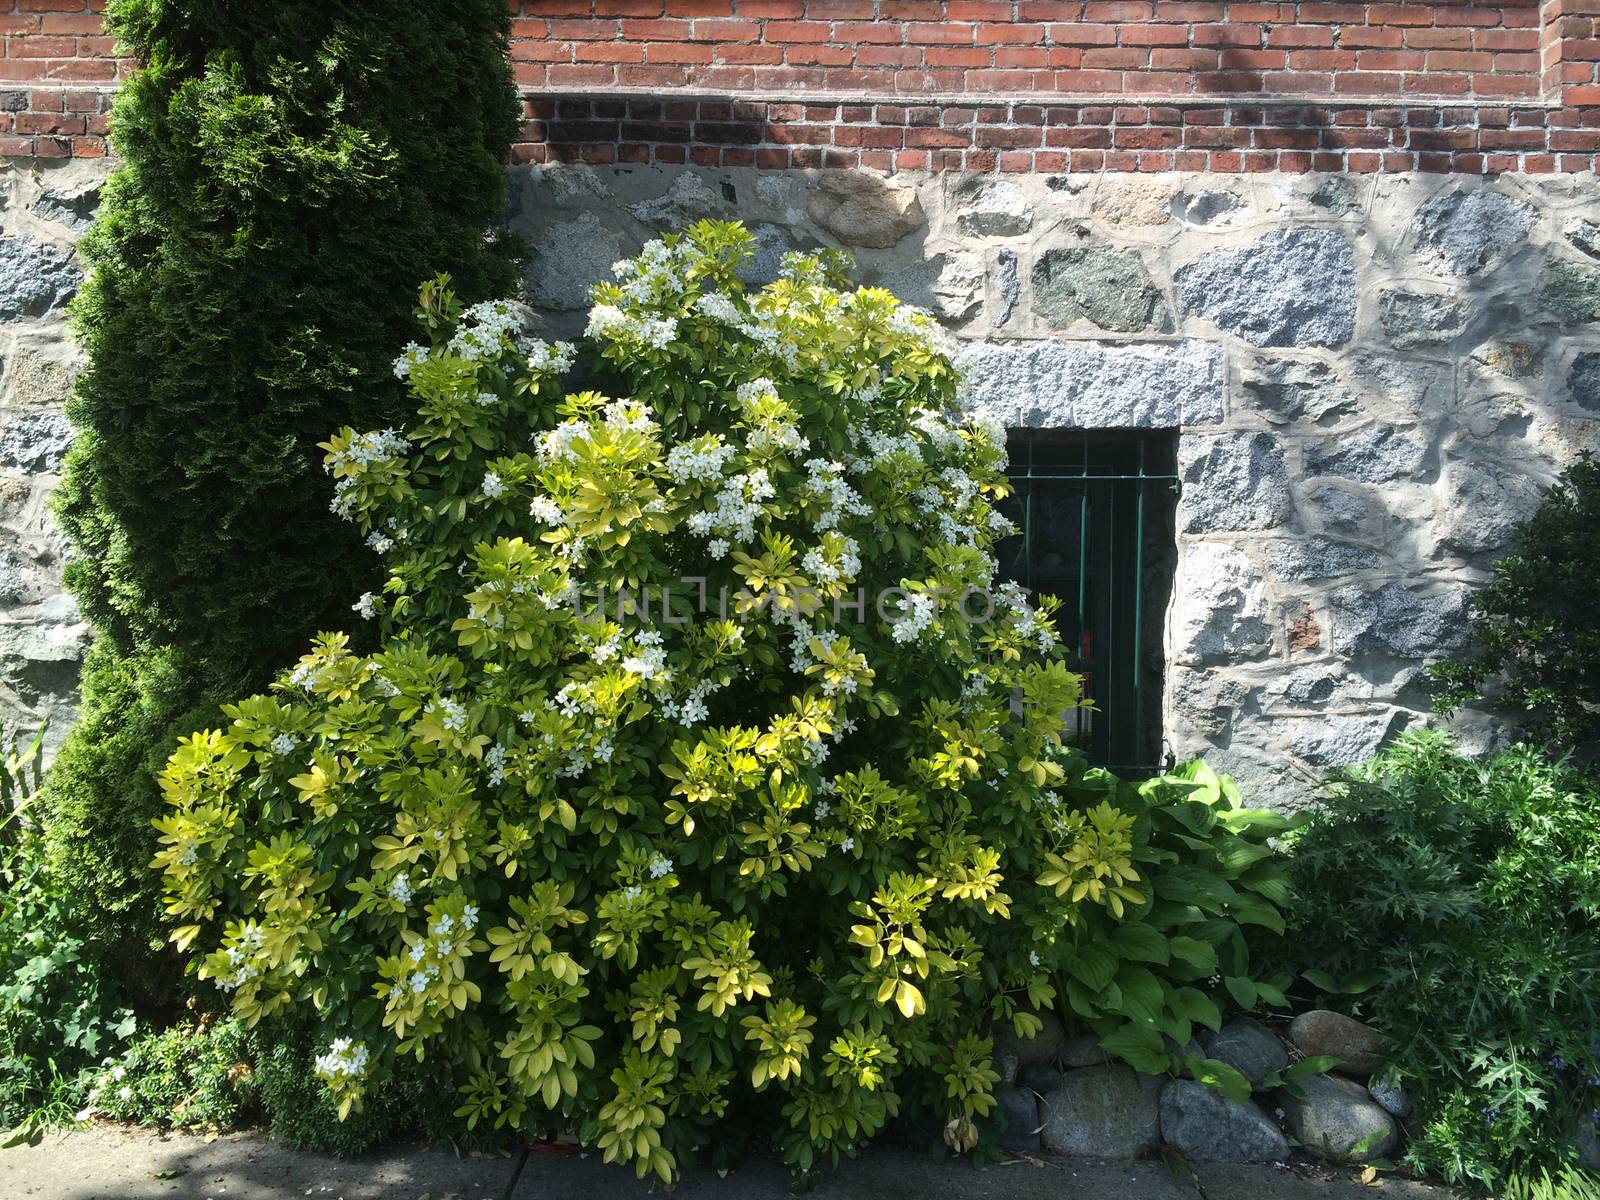 Flowering green bush near a stone wall and exterior window of a brick building